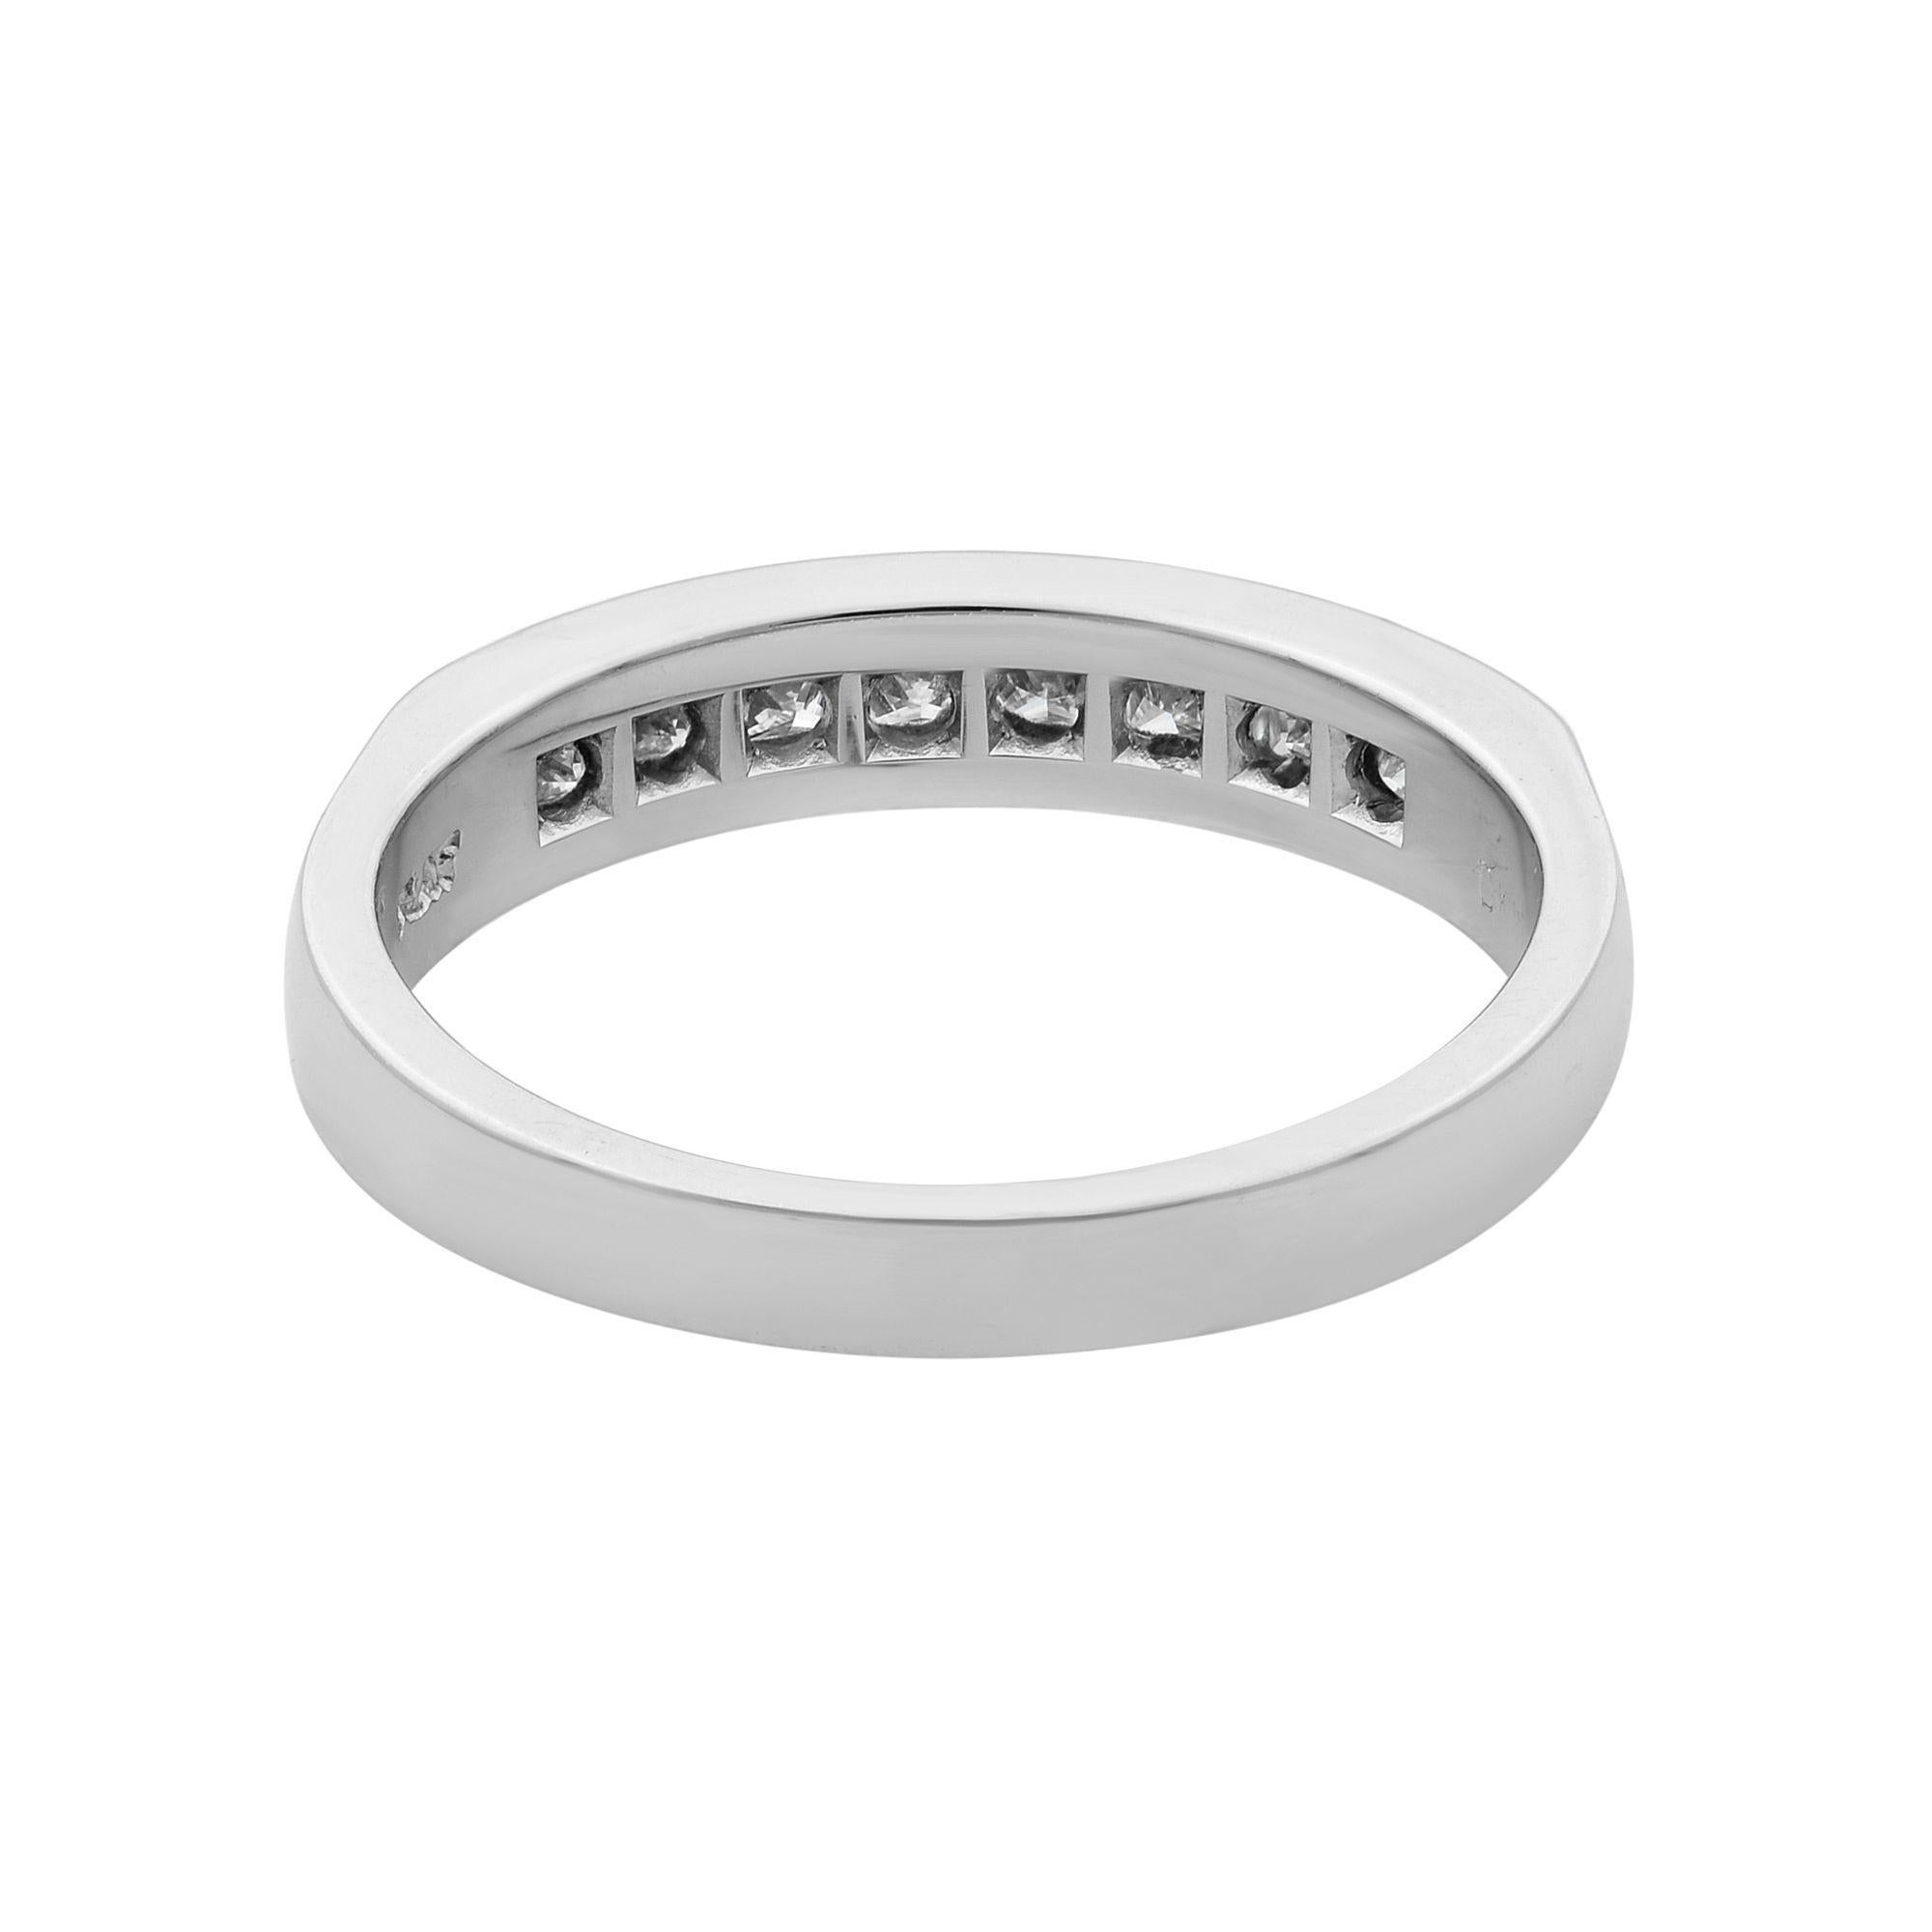 Rachel Koen Princess Cut Diamond Wedding Band Platinum 0.40Cttw Size 5.5 In New Condition For Sale In New York, NY